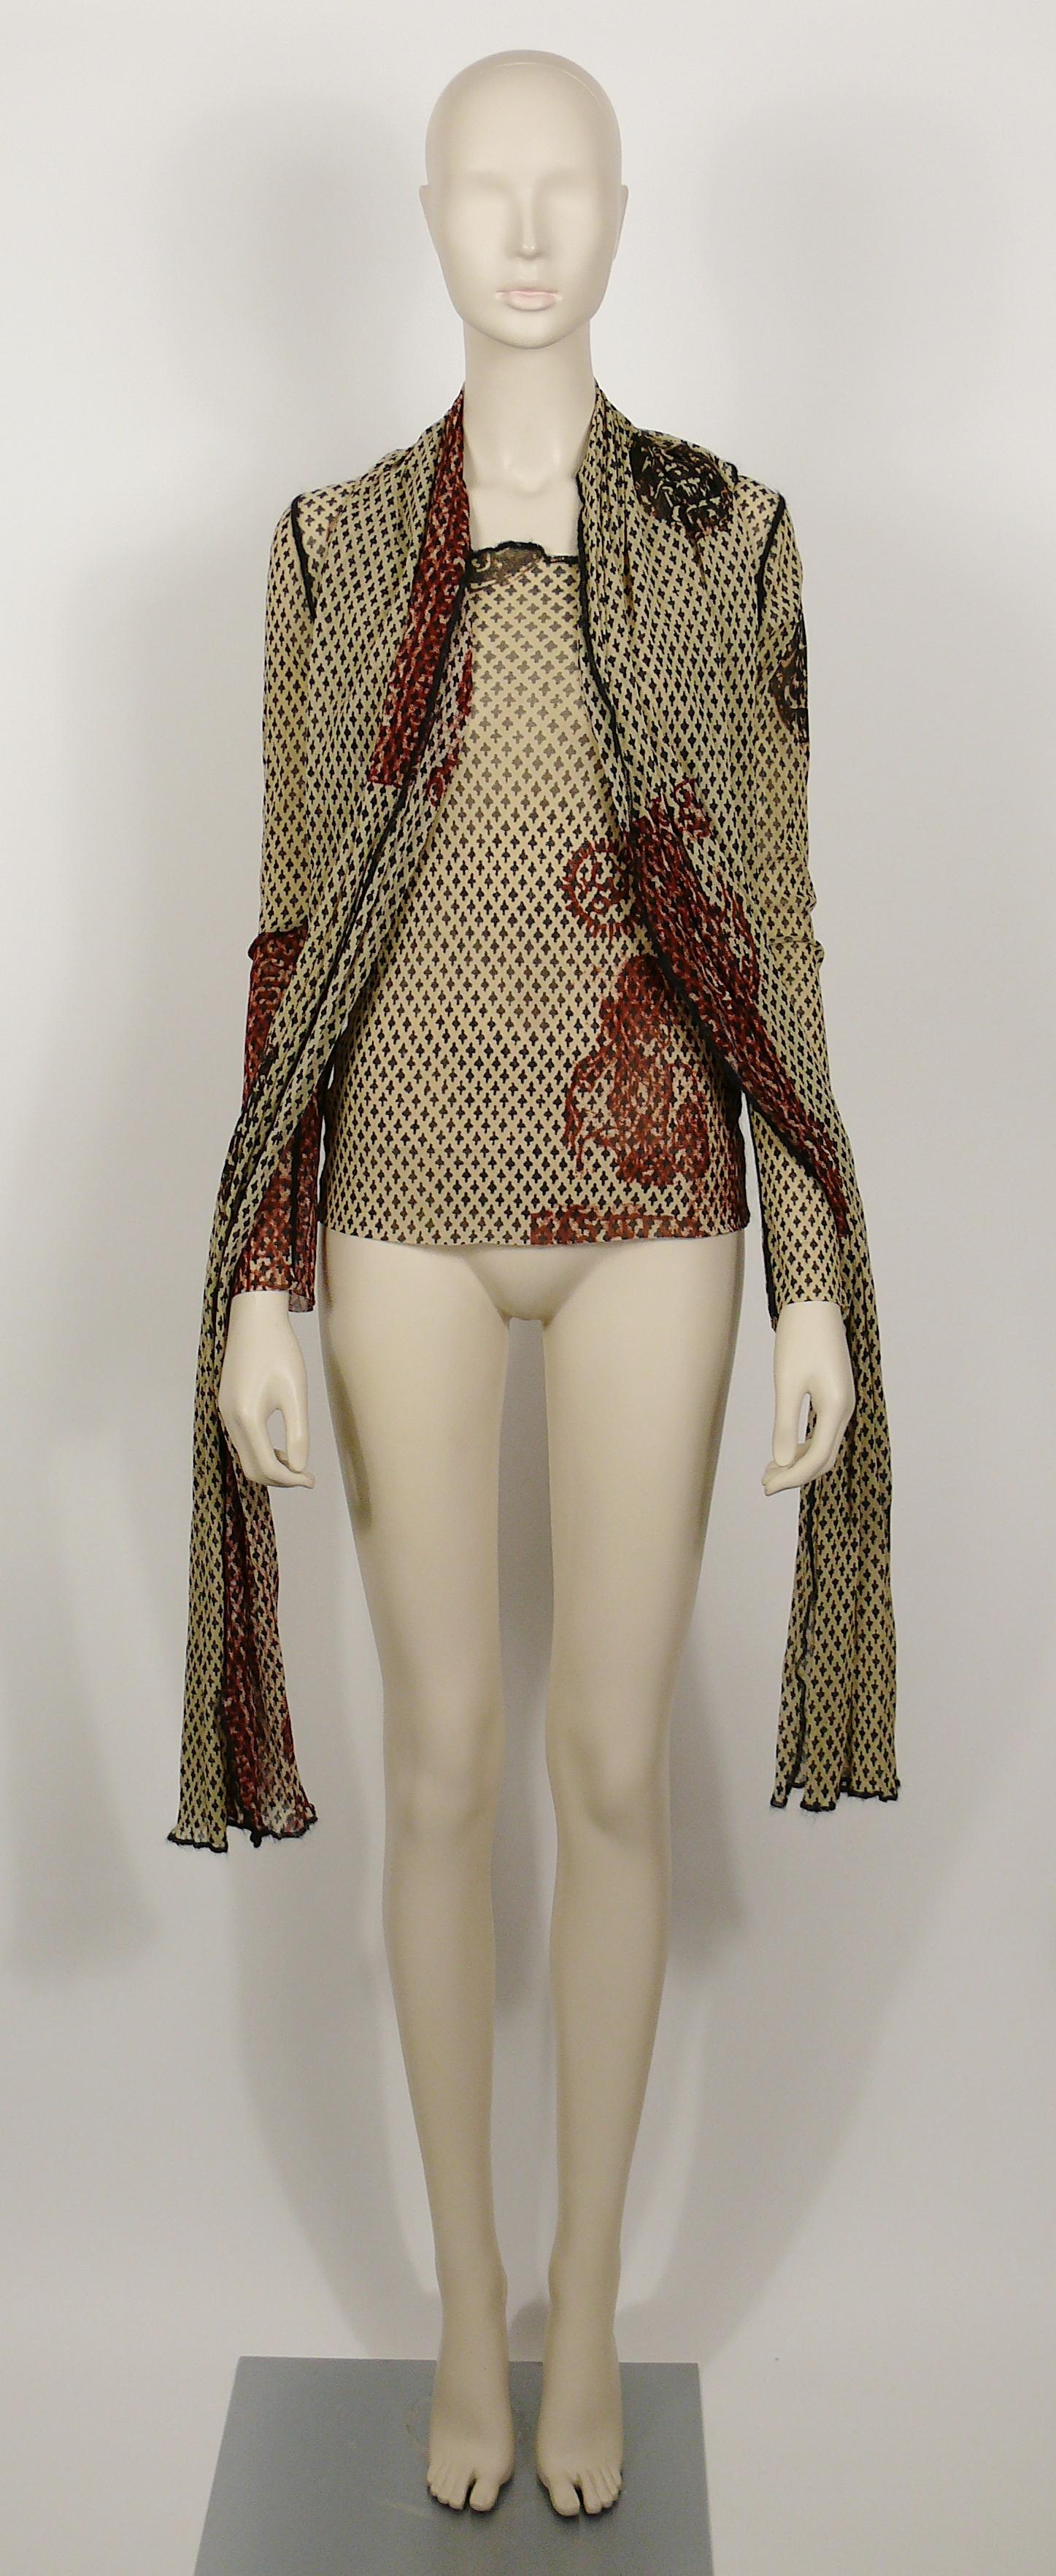 Jean Paul Gaultier Vintage Oriental Tattoo Sheer Mesh Top Size L In Good Condition For Sale In Nice, FR